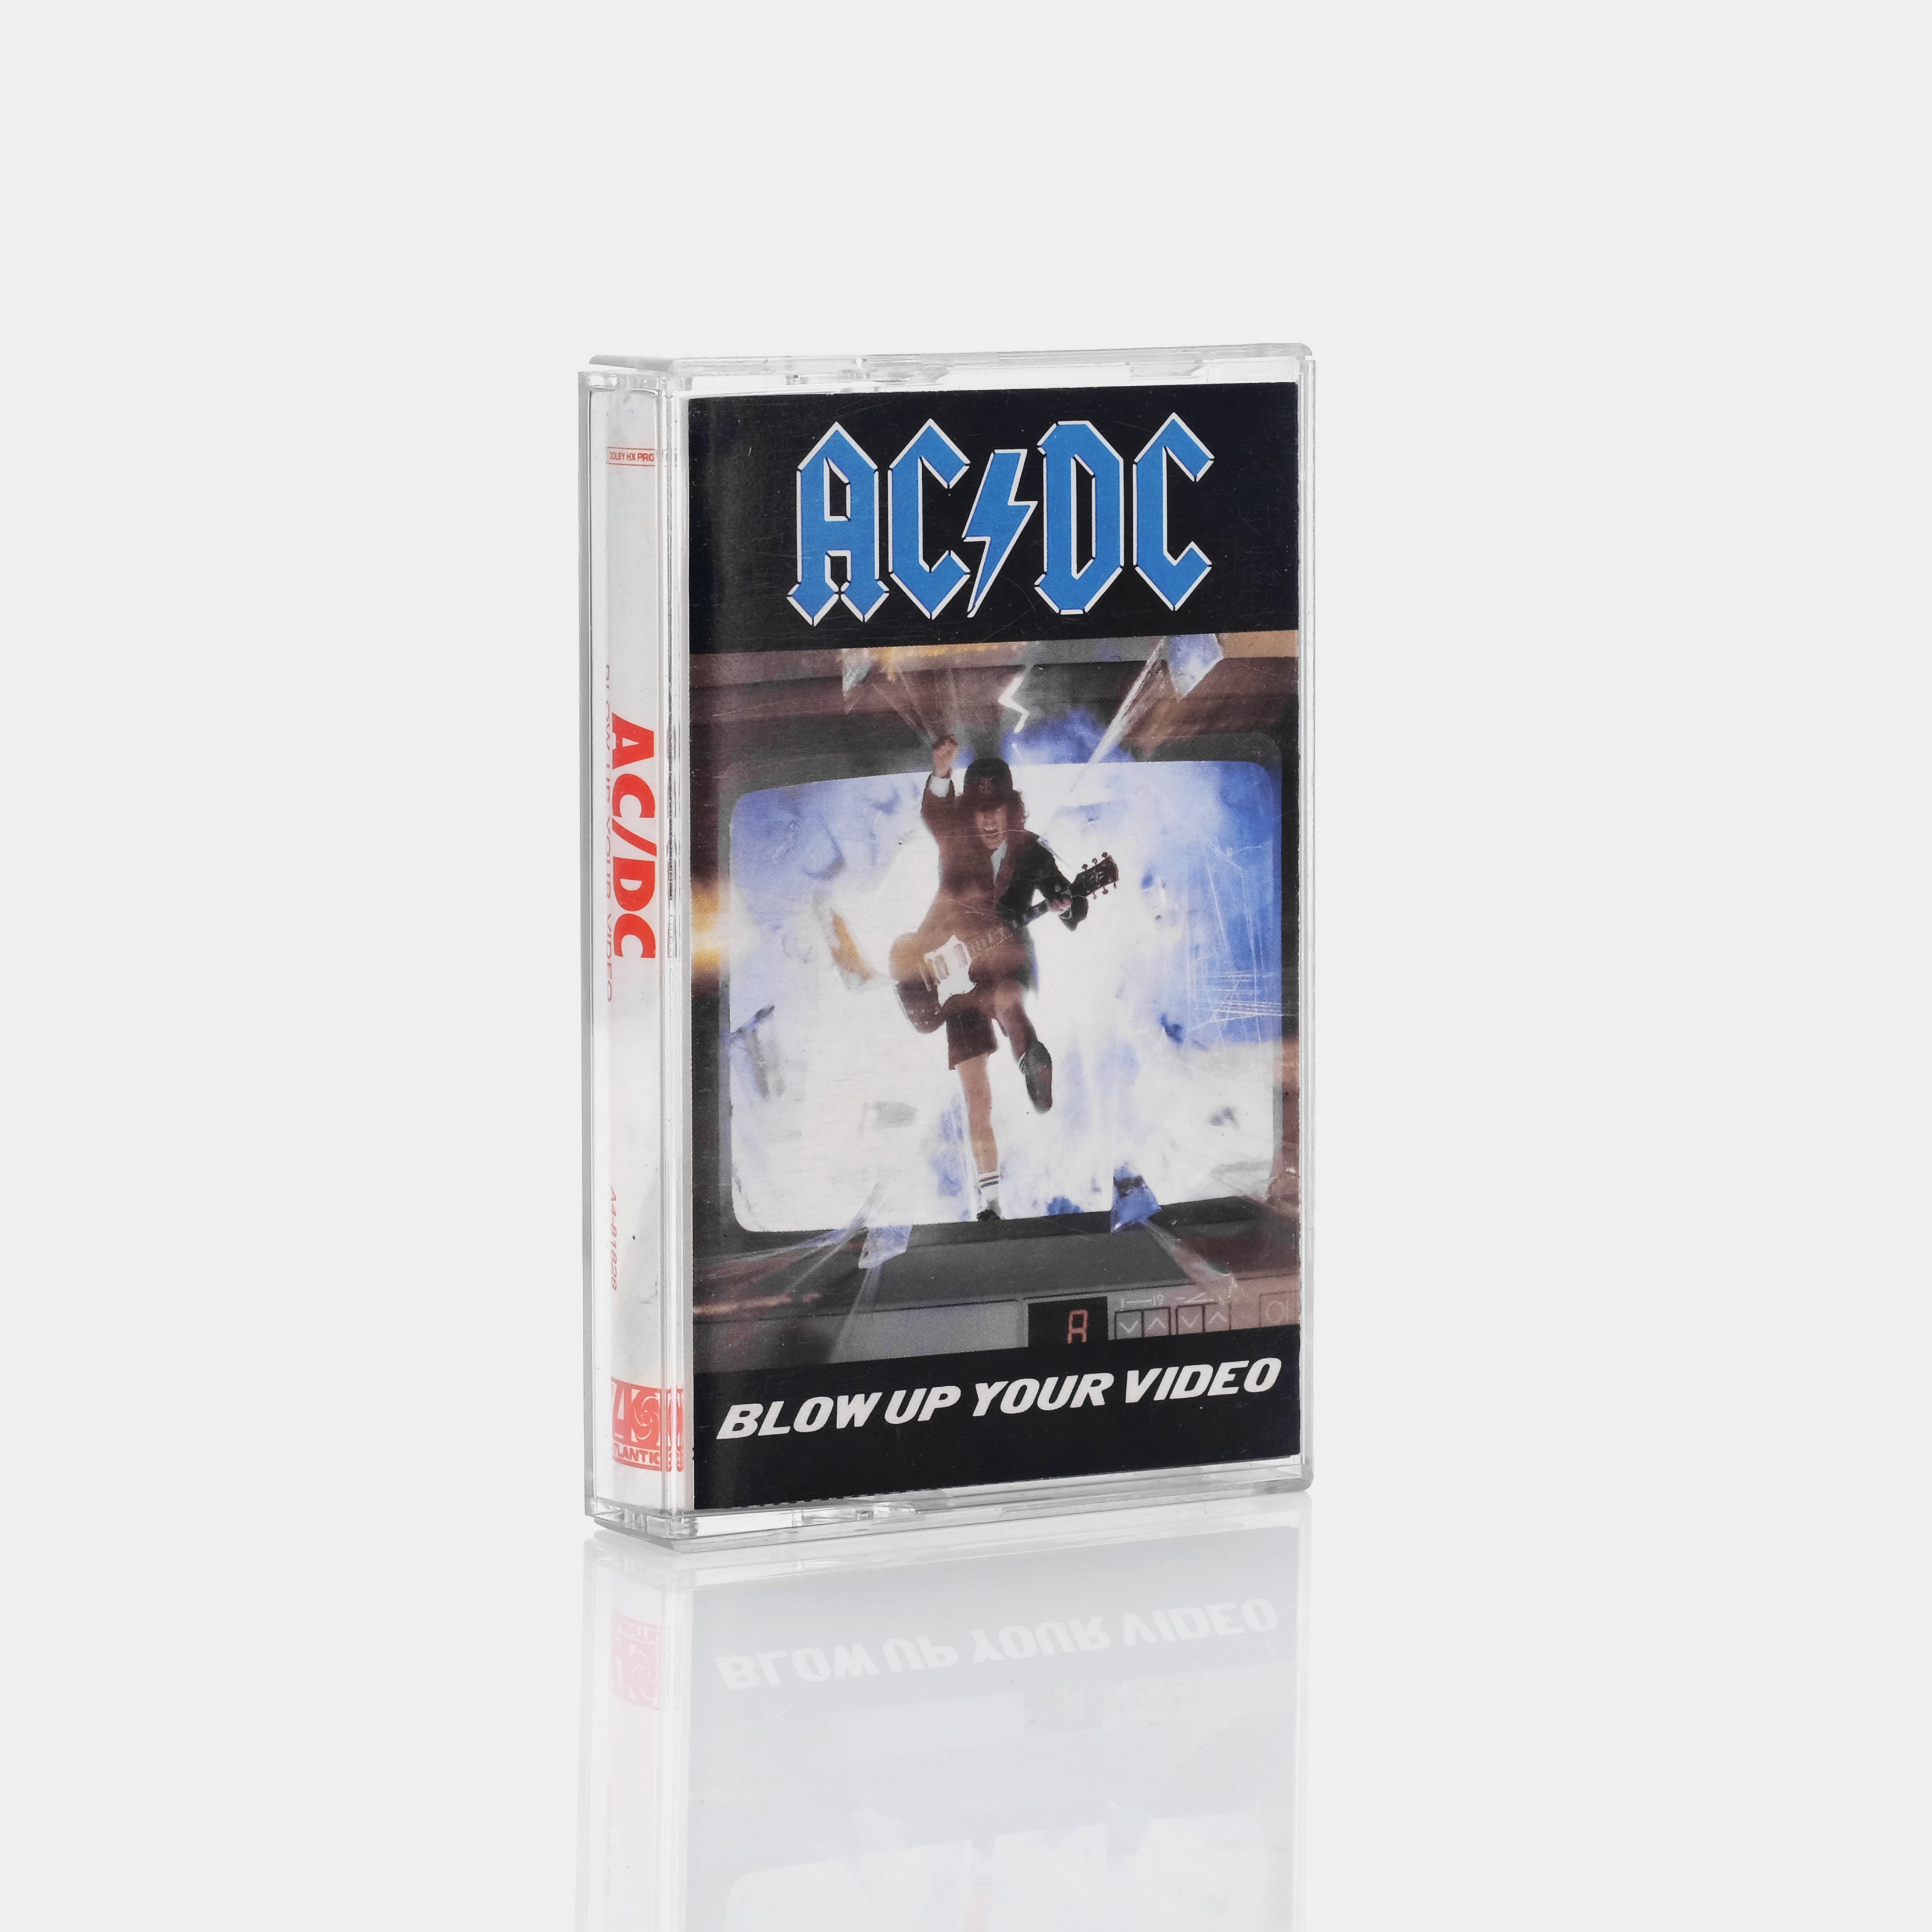 AC/DC - Blow Up Your Video Cassette Tape